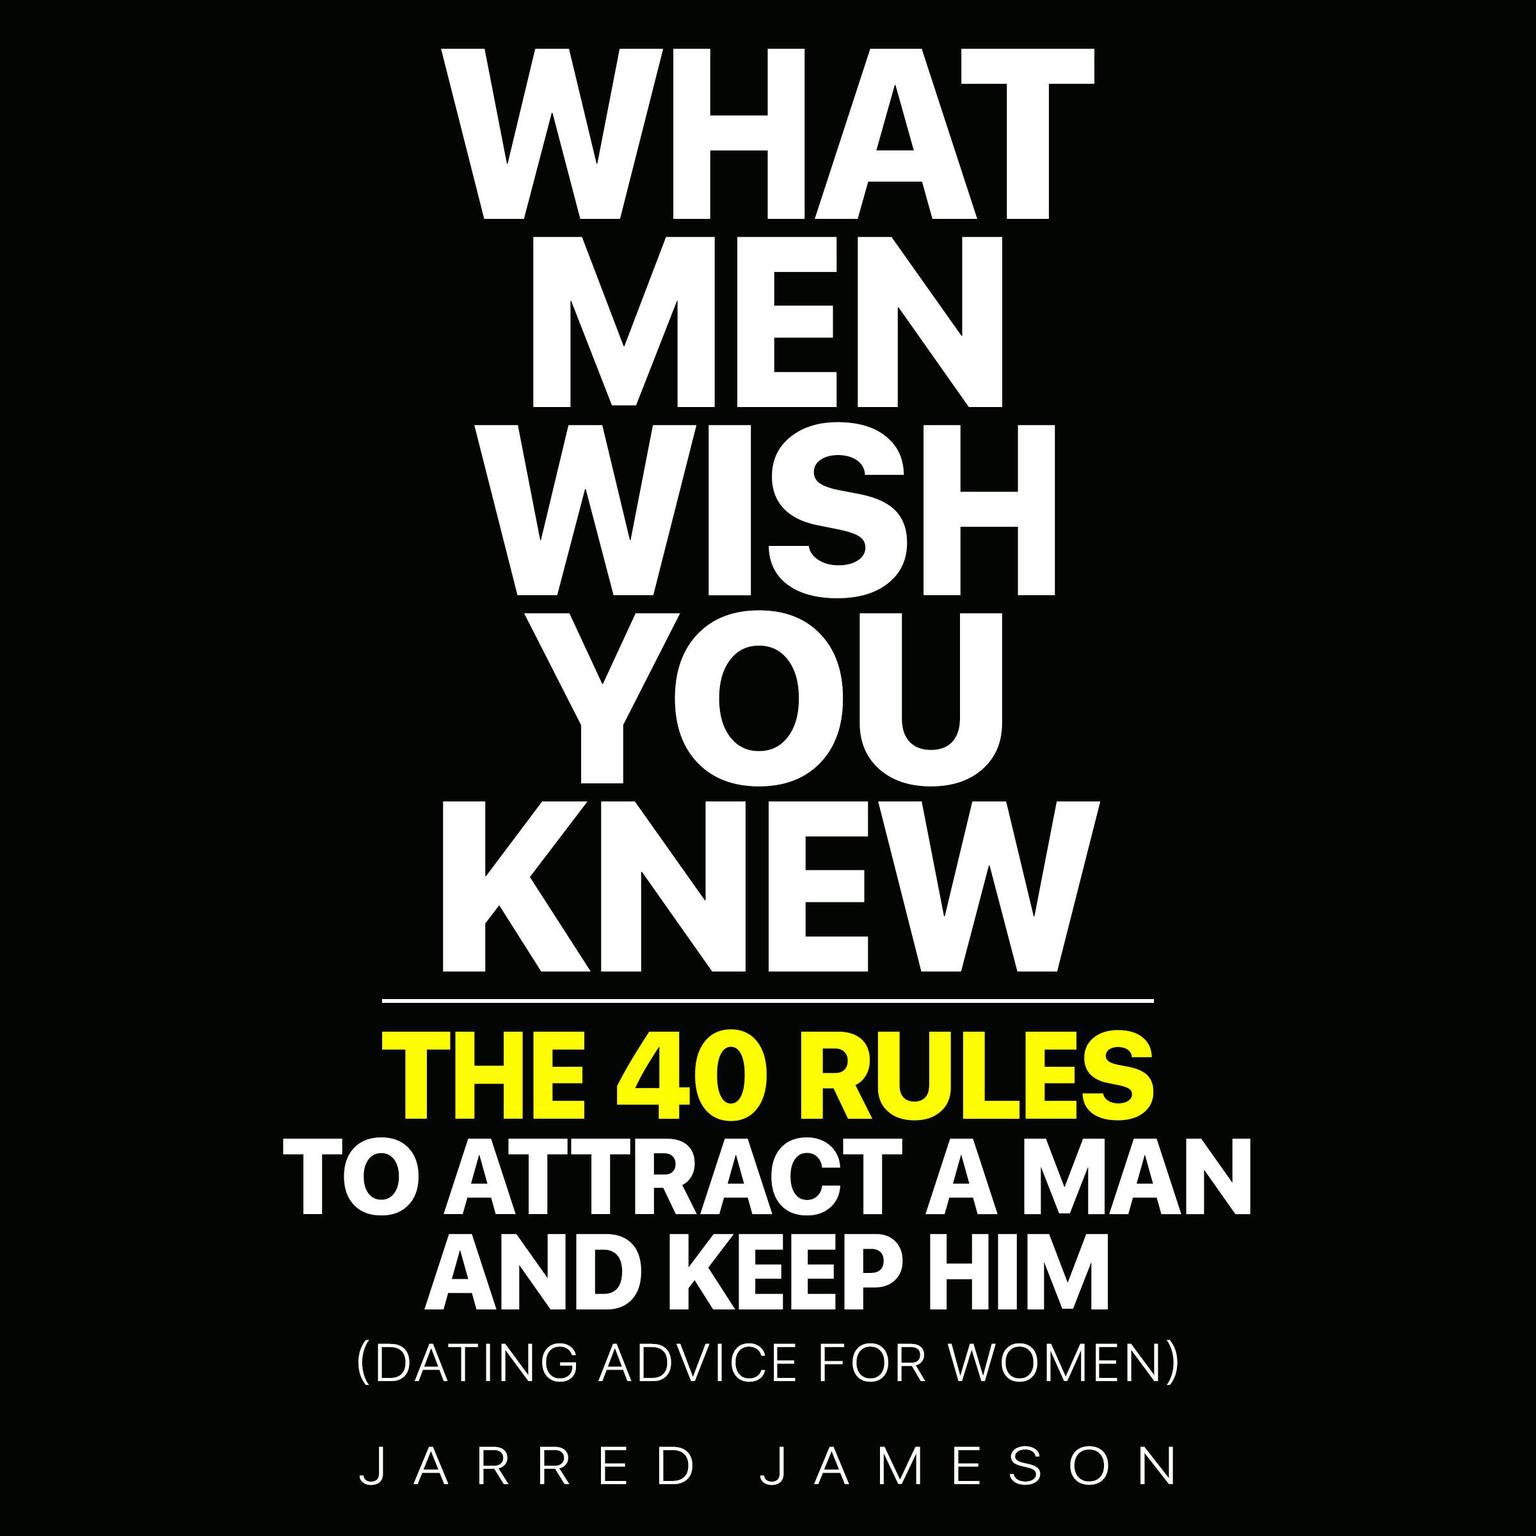 What Men Wish You Knew: The 40 Rules to Attract a Man and Keep Him (Dating Advice For Women) Audiobook, by Jarred Jameson